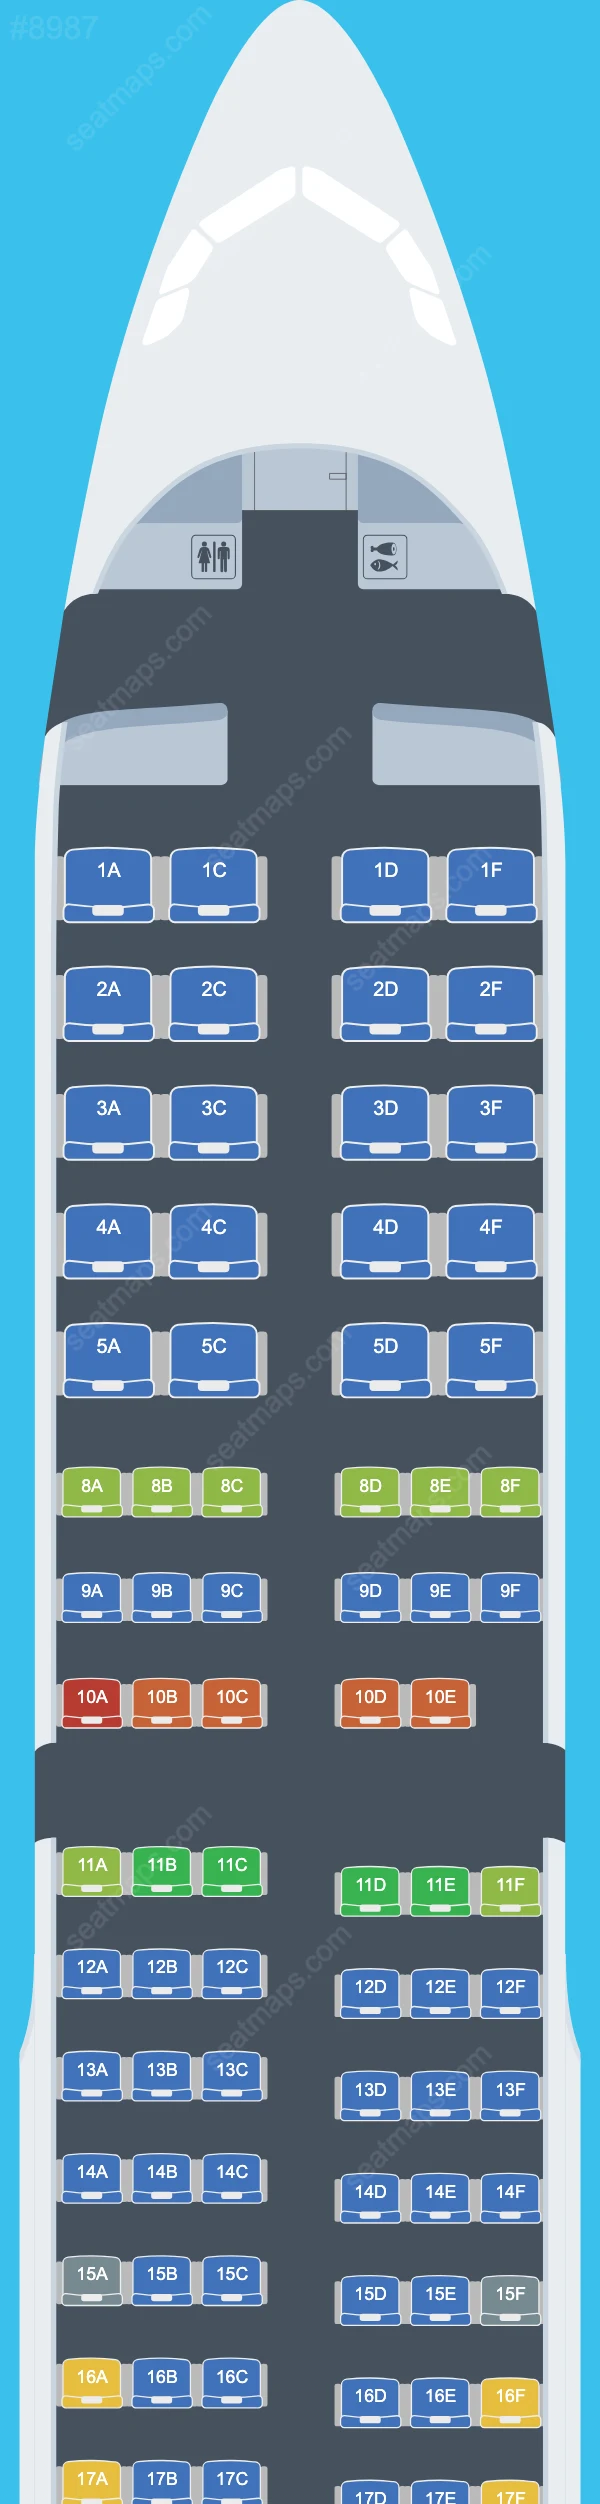 American Airlines Airbus A321 Seat Maps A321-200 V.1